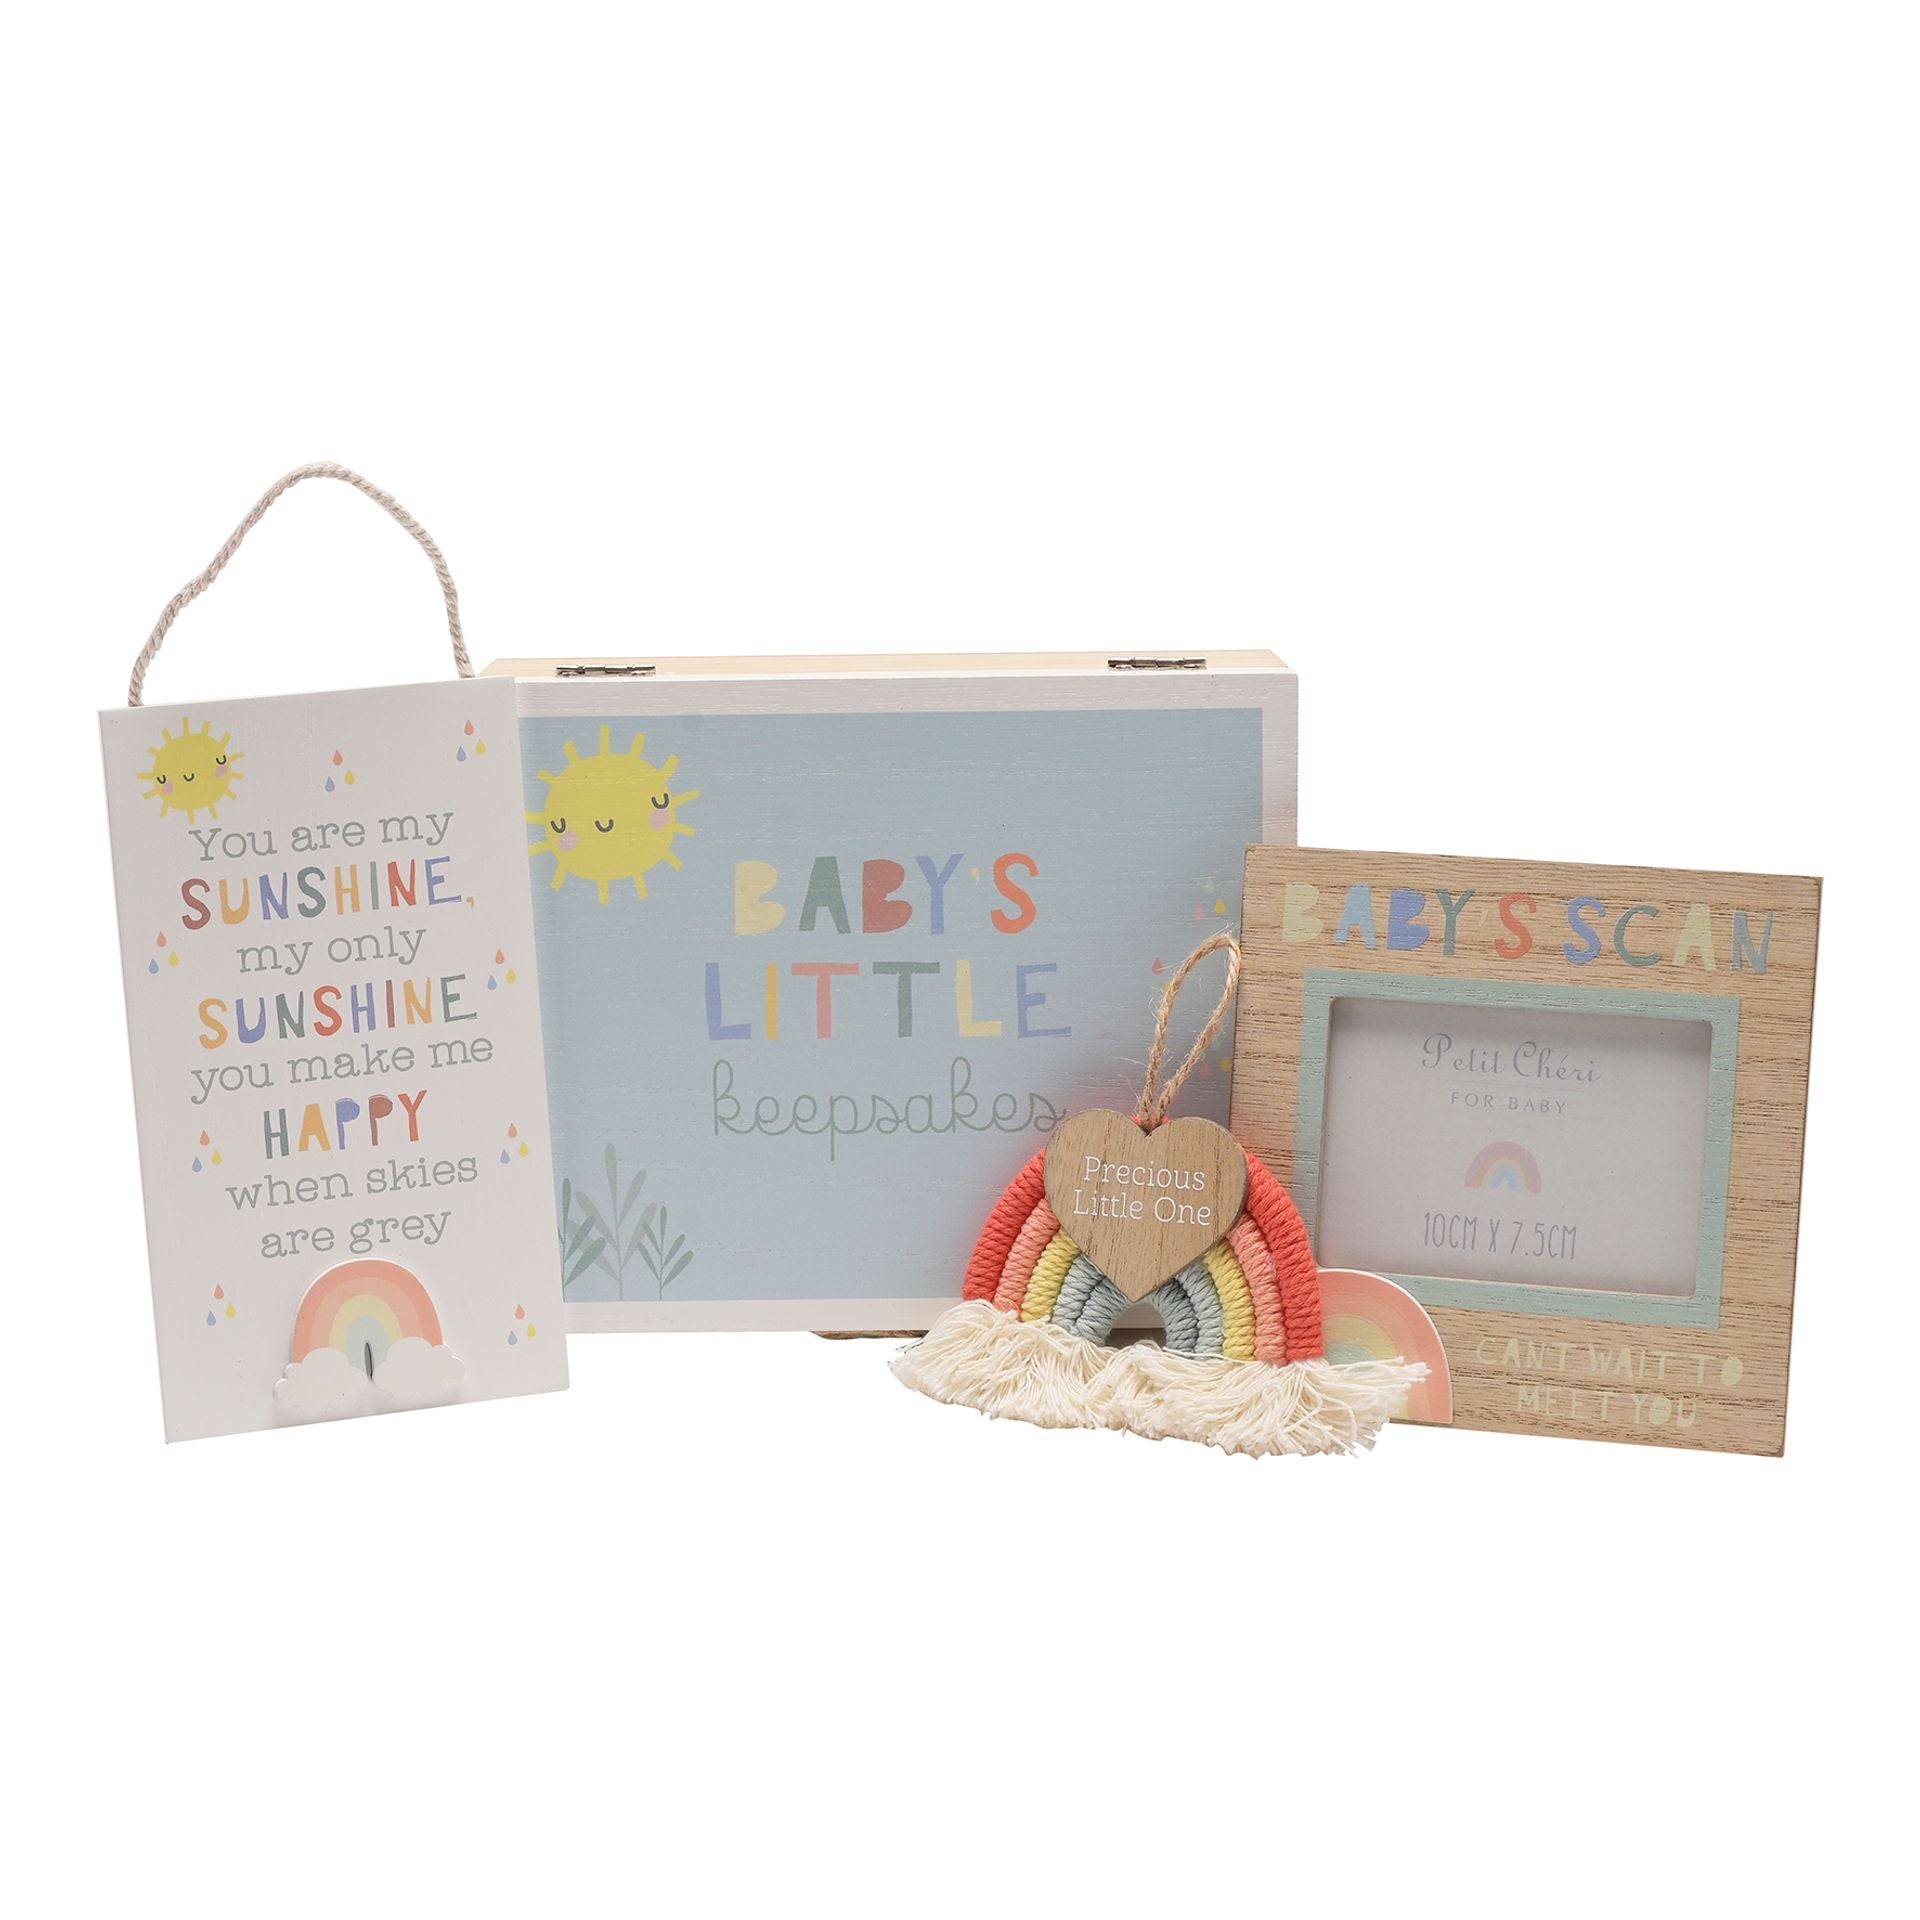 A superb gift set selection for the first moments of a babies life, including a wooden keepsake box, 'Baby' Scan photo frame, hanging plaque and macrame rainbow.